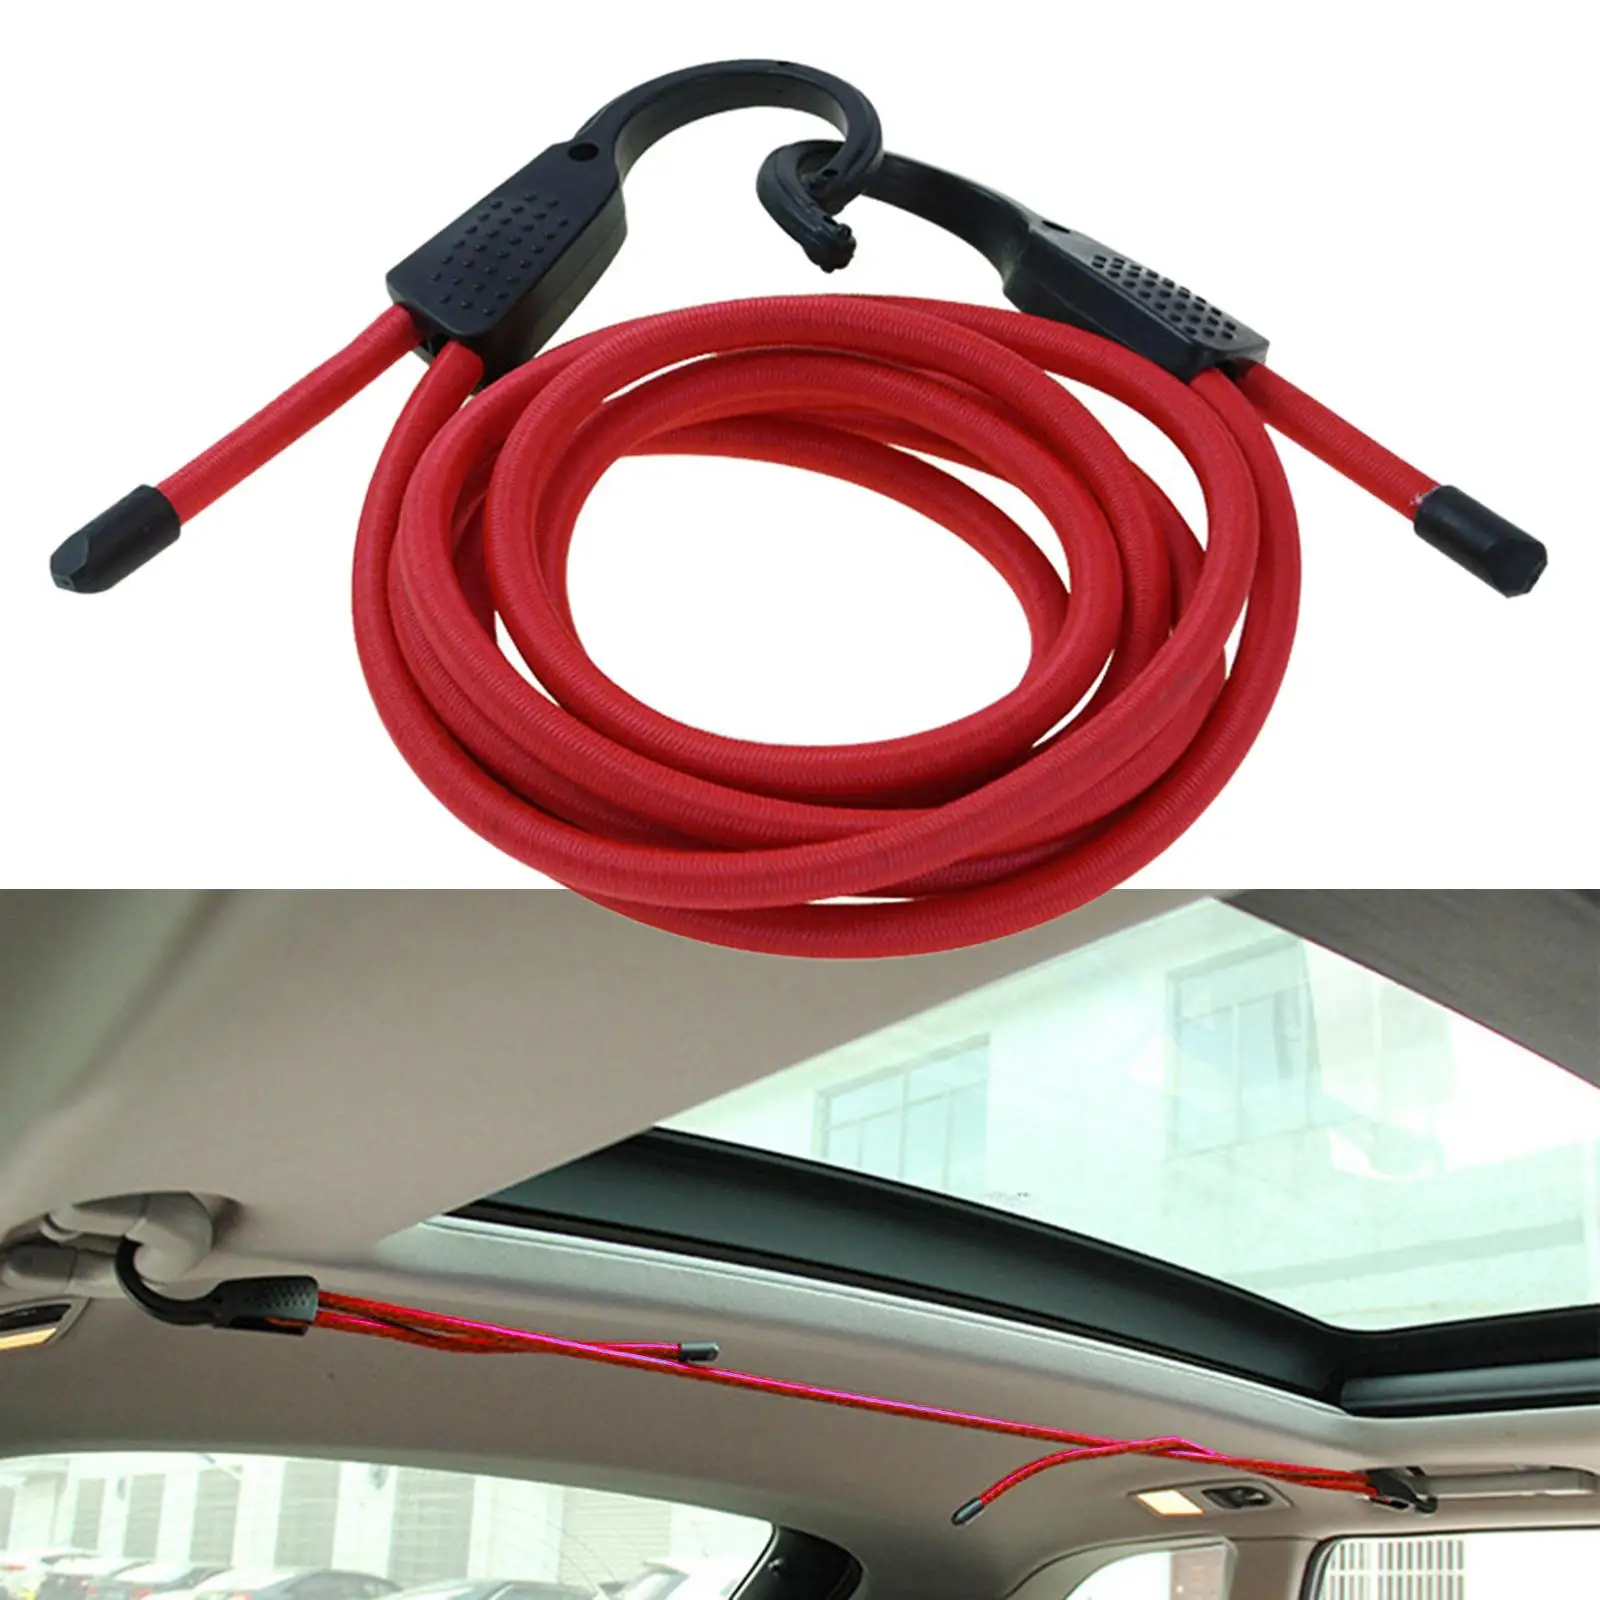 Rubber Elastic Strap Heavy Duty Cargo Luggage Lashing Buckle Rope Car Clothesline Hook Cargo Straps for Camping Motorcycle